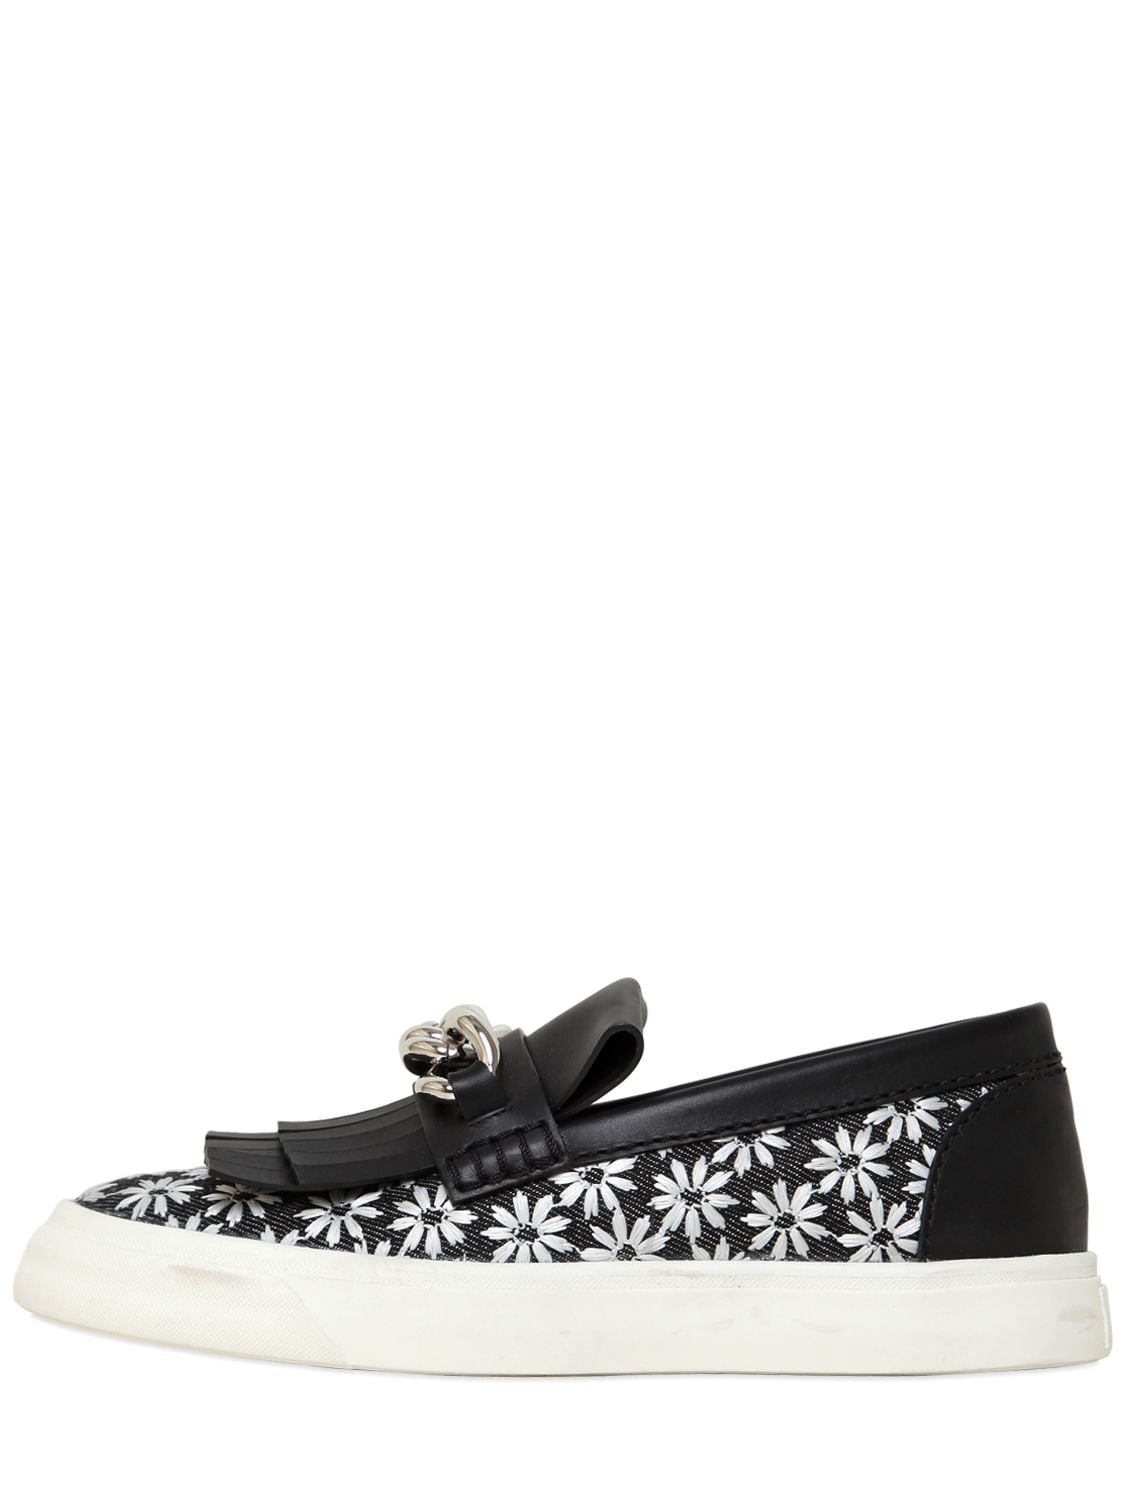 Giuseppe Zanotti Chained Daisy Canvas Slip On Sneakers In Black,white